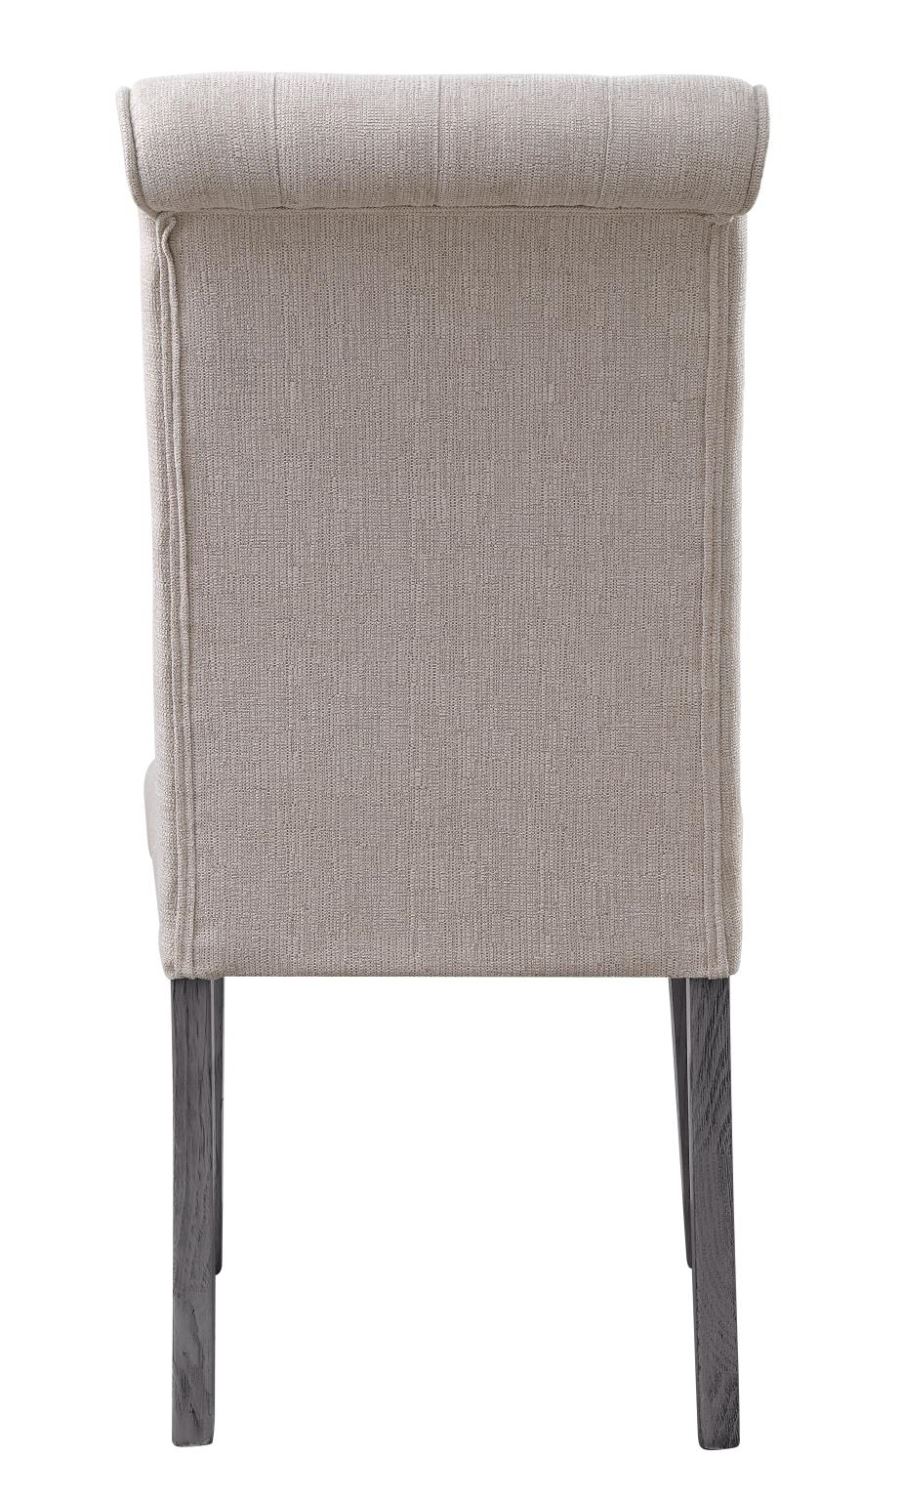 Bois Linen Dining Side Chair - Set of 2